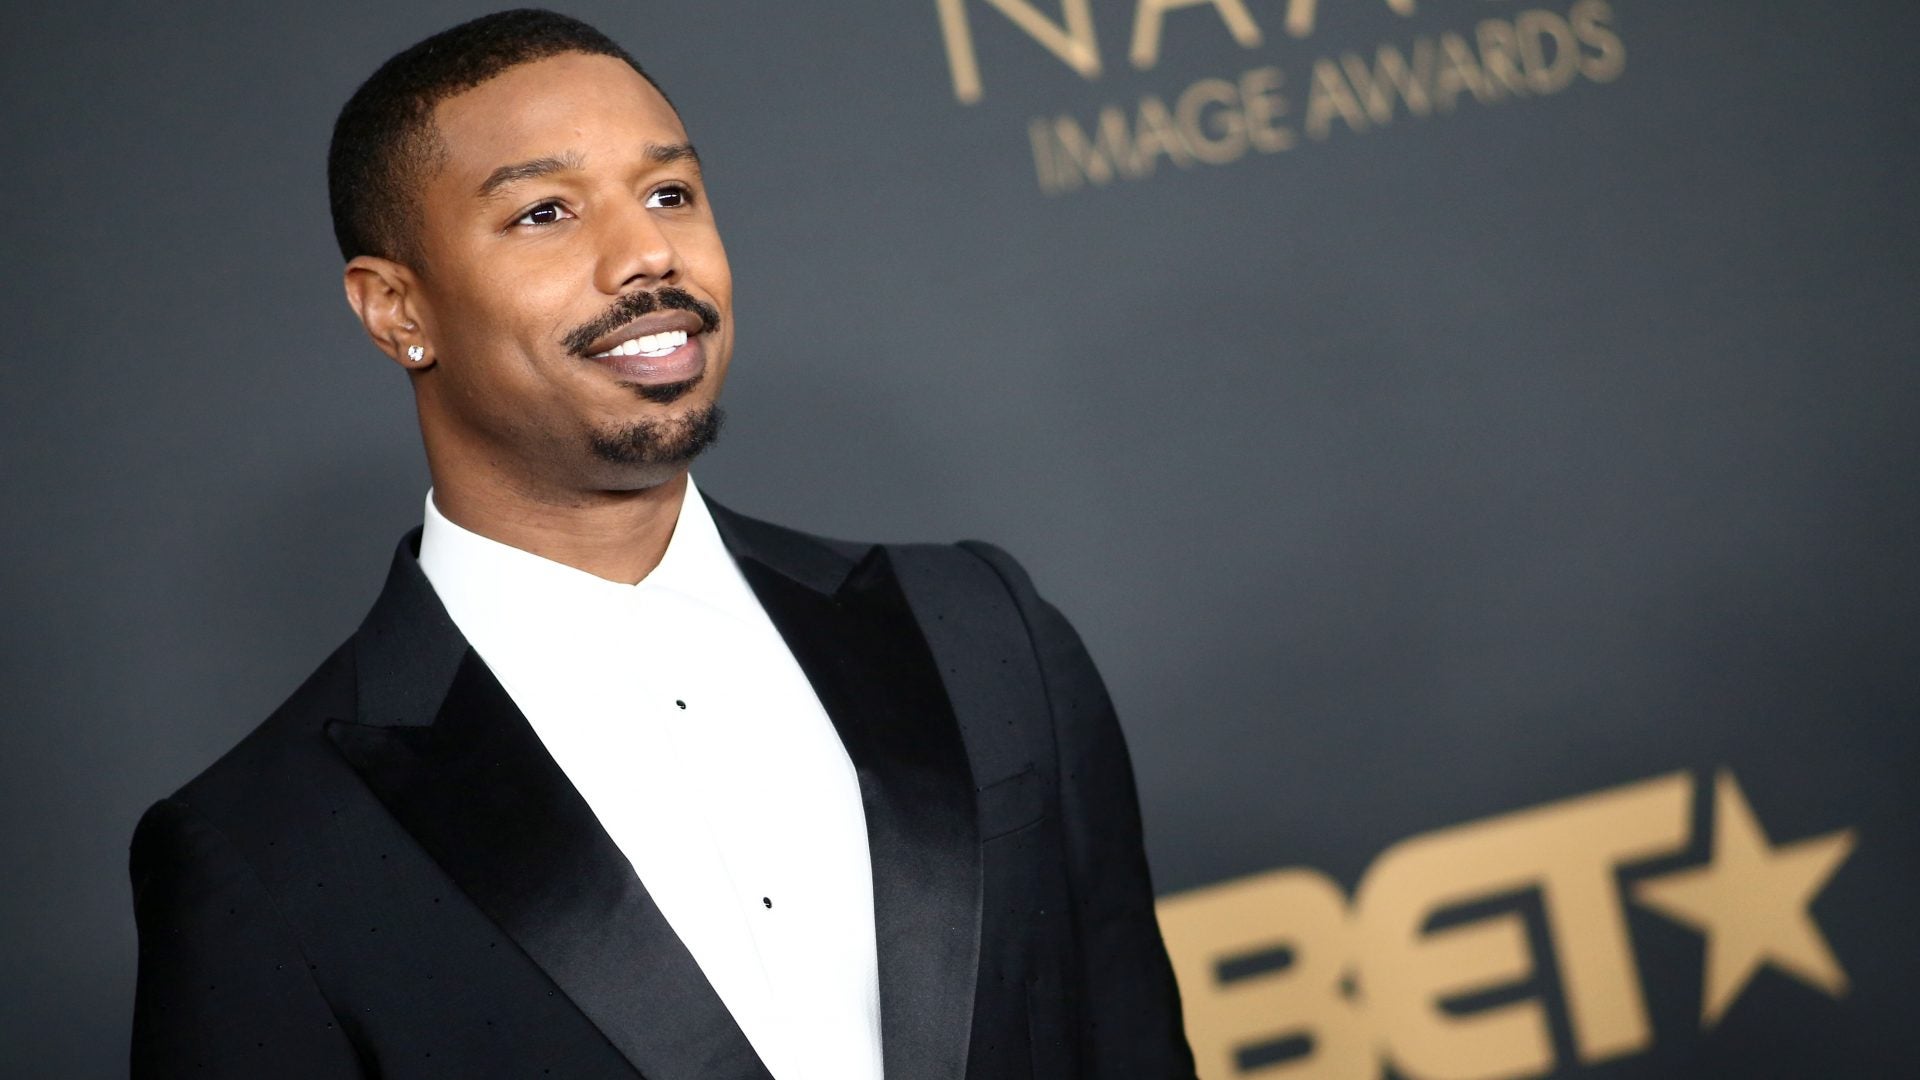 Hey Ladies! Here's What Michael B. Jordan Is Looking For In A Future Queen